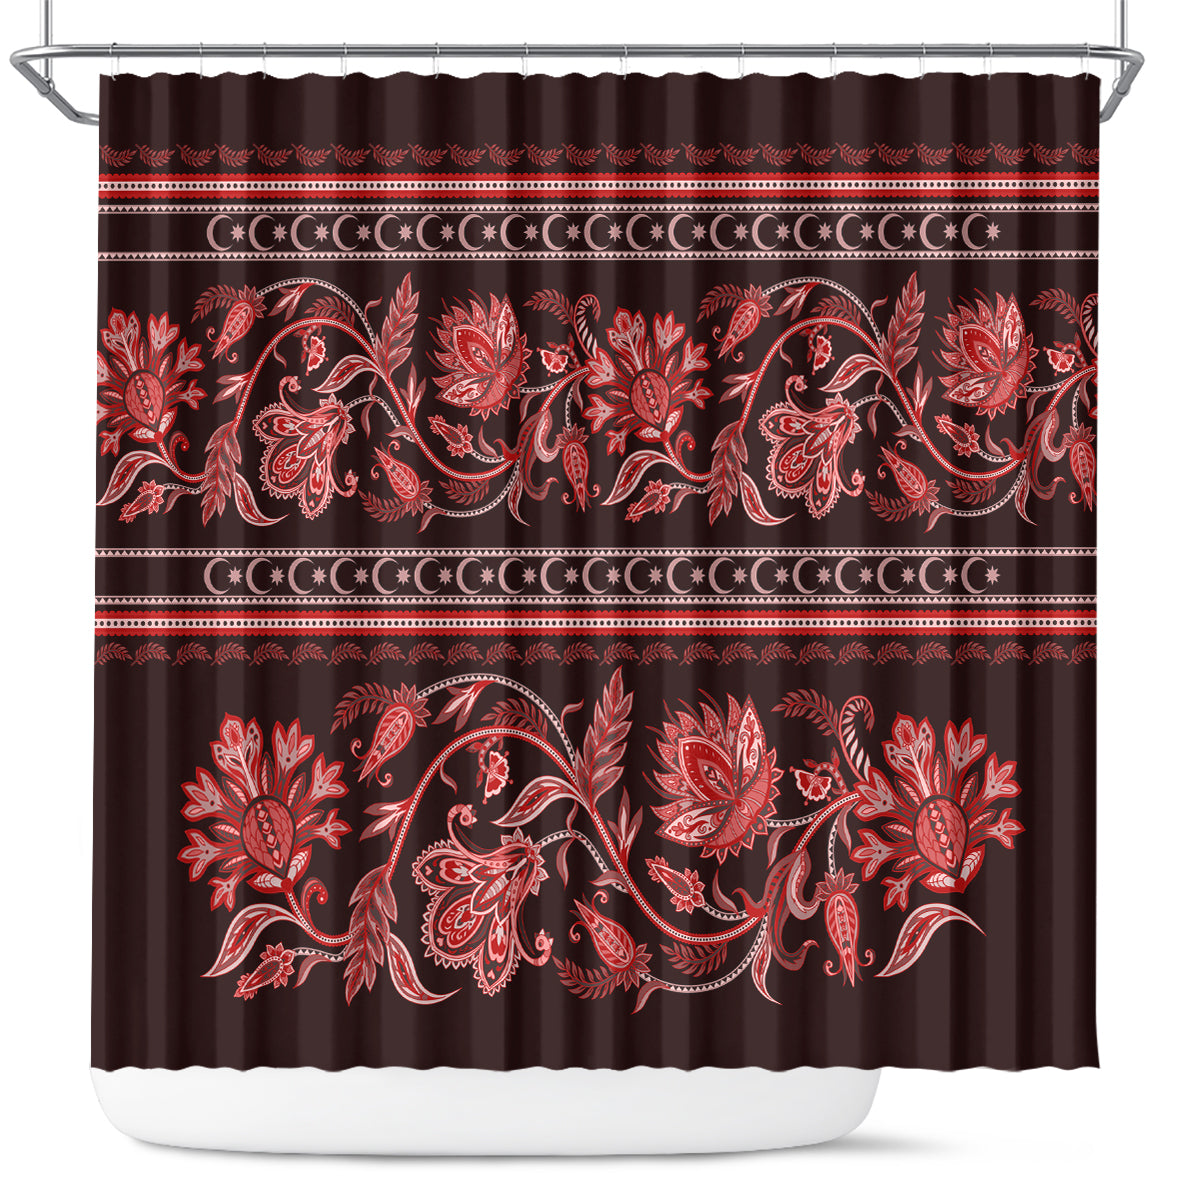 azerbaijan-shower-curtain-traditional-pattern-ornament-with-flowers-buta-red